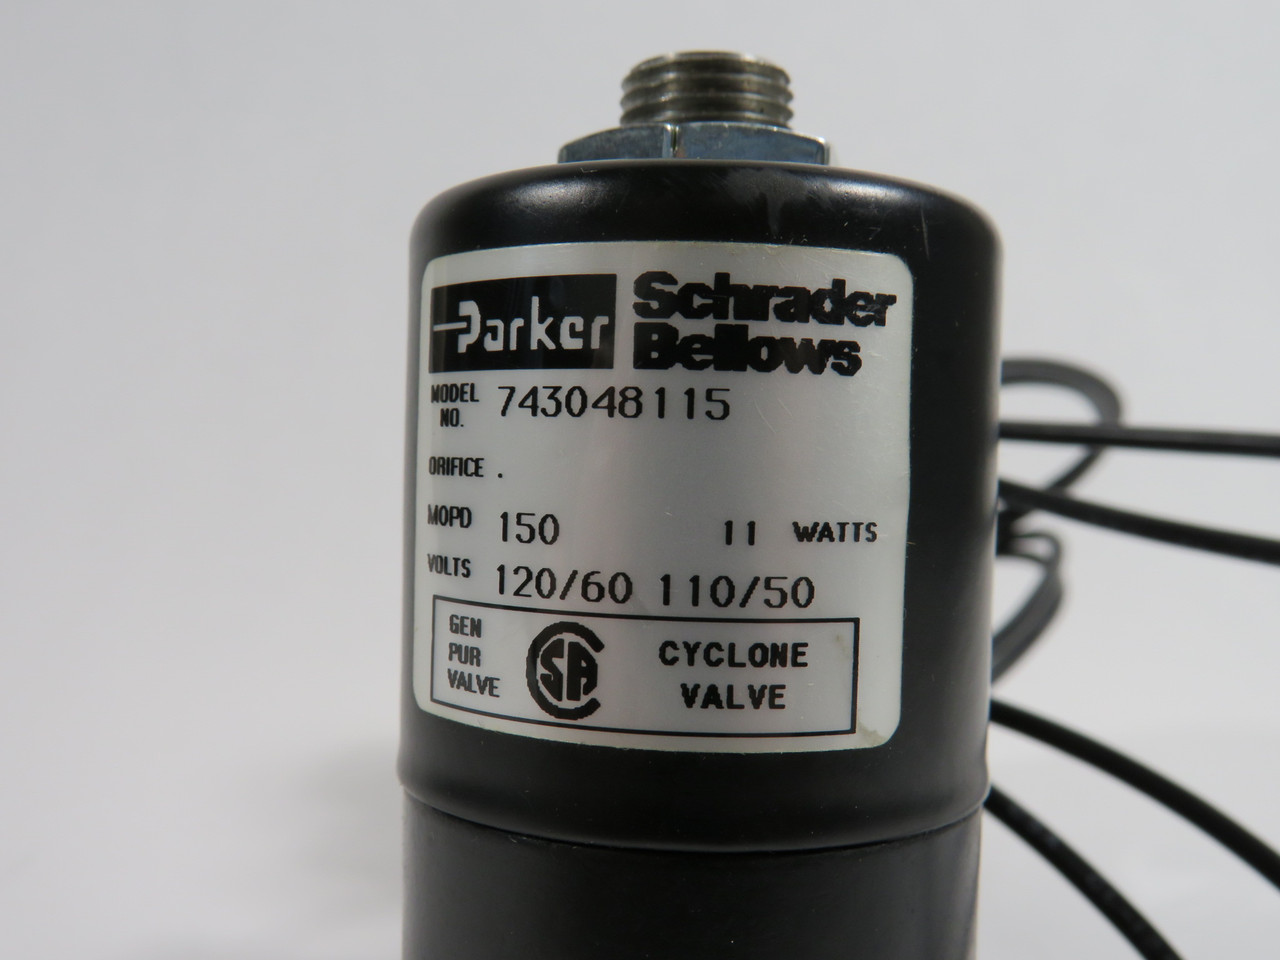 Parker Schrader Bellows 529001115 Double Solenoid Valve 150psi *Cos Dmg* USED